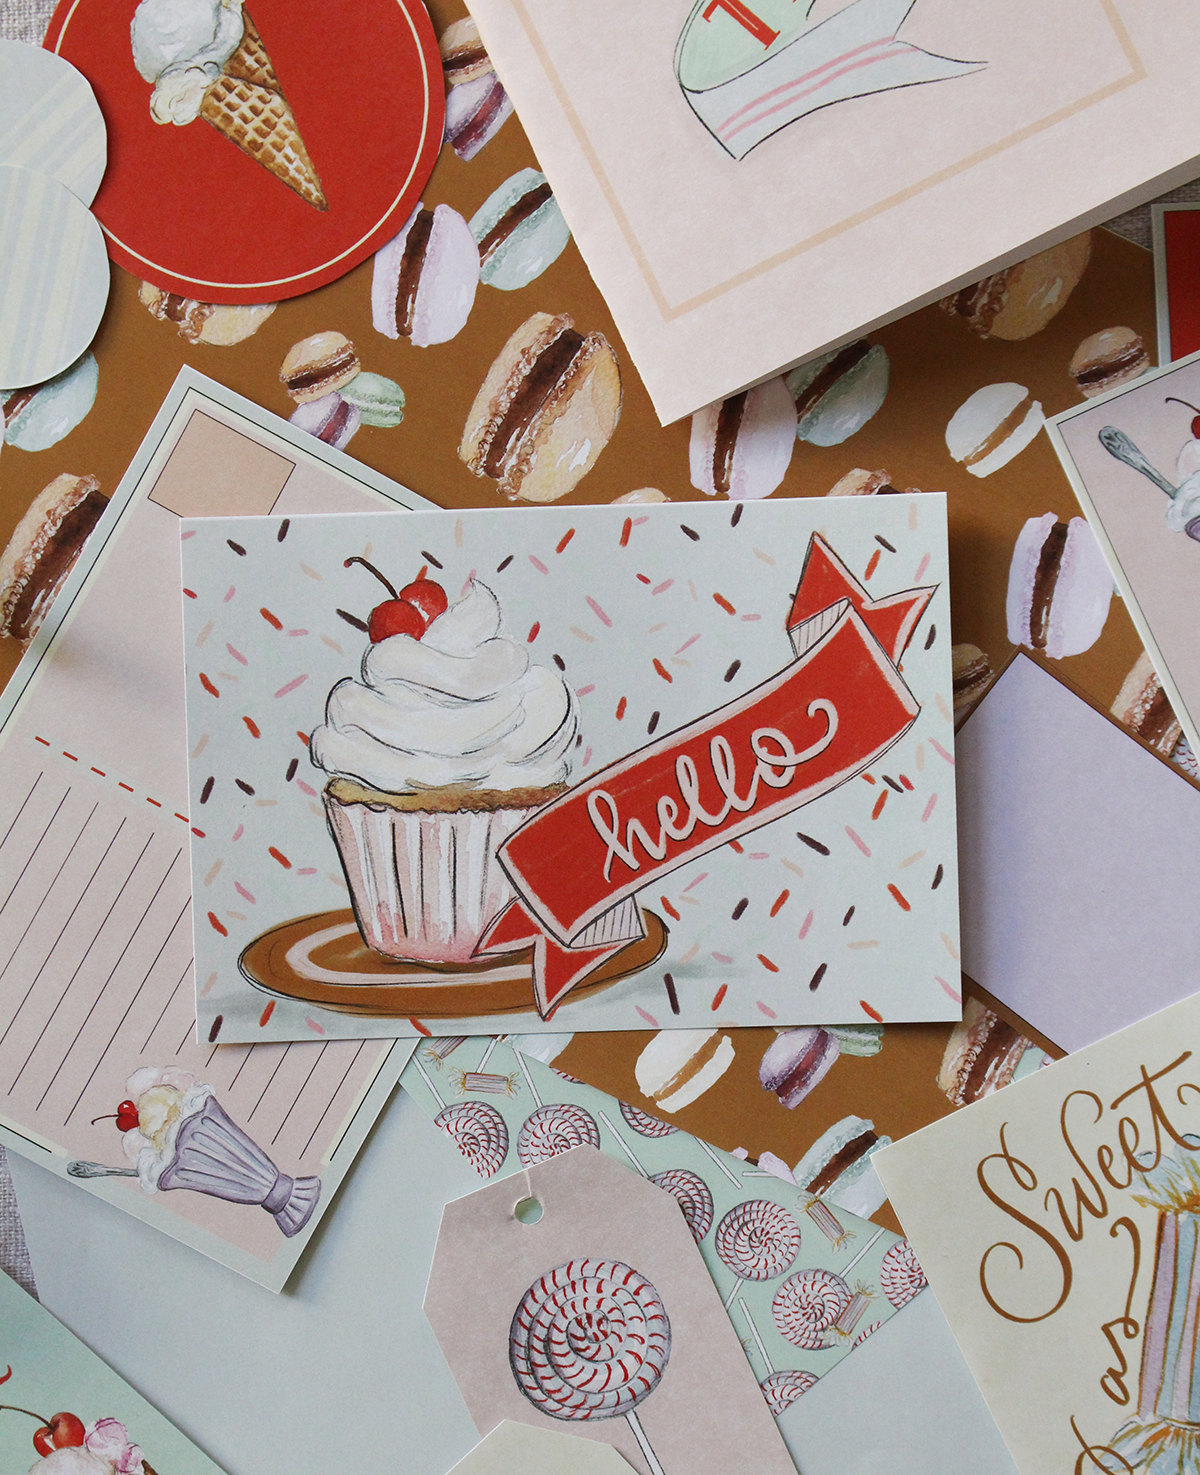 Life of The Party Paper Crafting by Lily & Val is filled with ready-to-use cards, tags, coasters, menus and more for throwing lovely parties